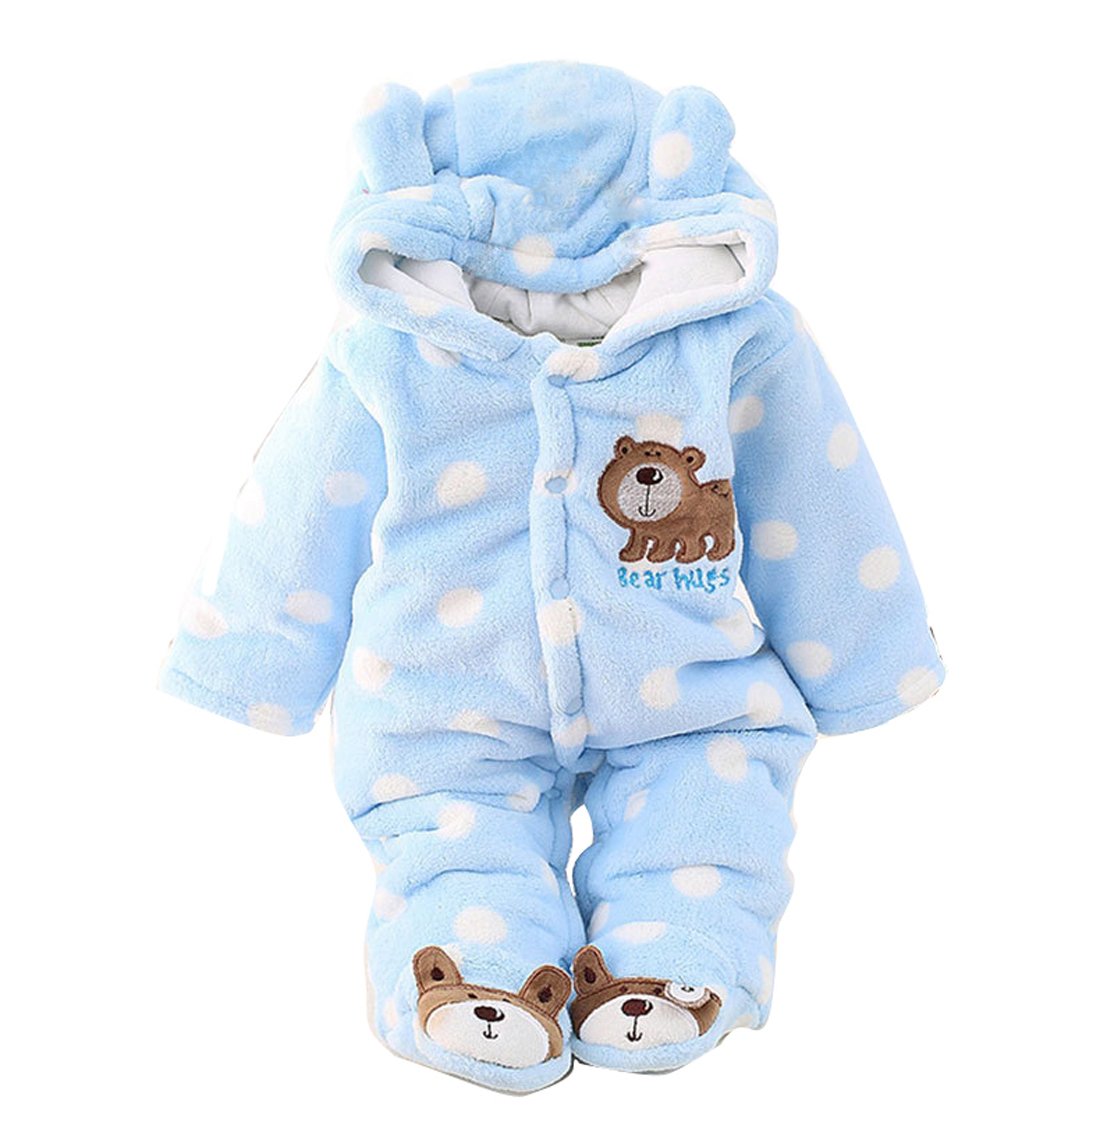 Book Cover Gaorui Newborn Baby Jumpsuit Outfit Hoody Coat Winter Infant Rompers Toddler Clothing Bodysuit 0-3 Months Blue